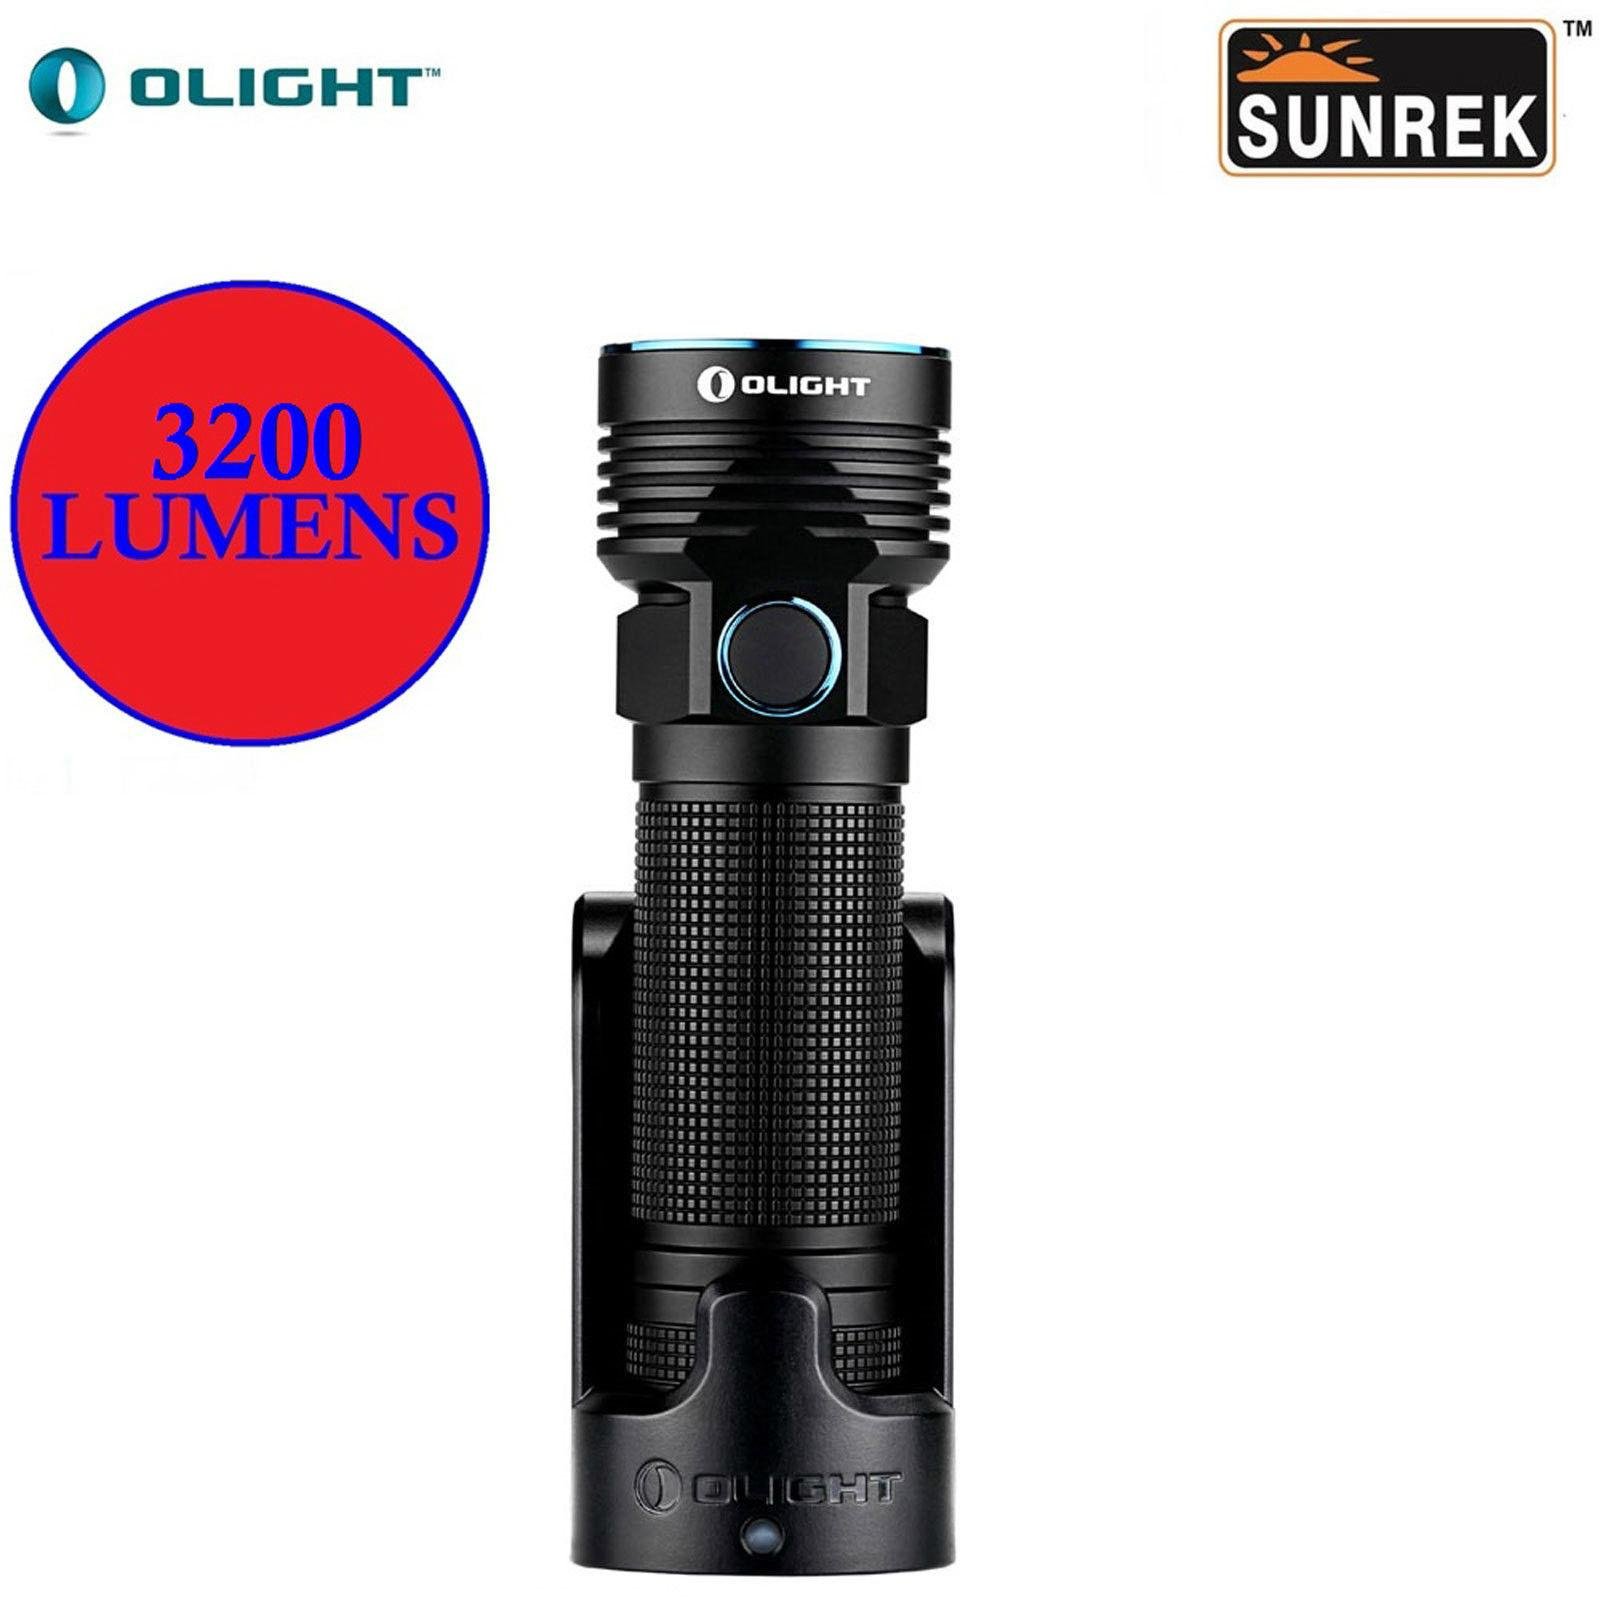 OLIGHT R50 PRO LE SEEKER RECHARGEABLE SIDE SWITCH LED FLASHLIGHT MAX 3200 LUMENS